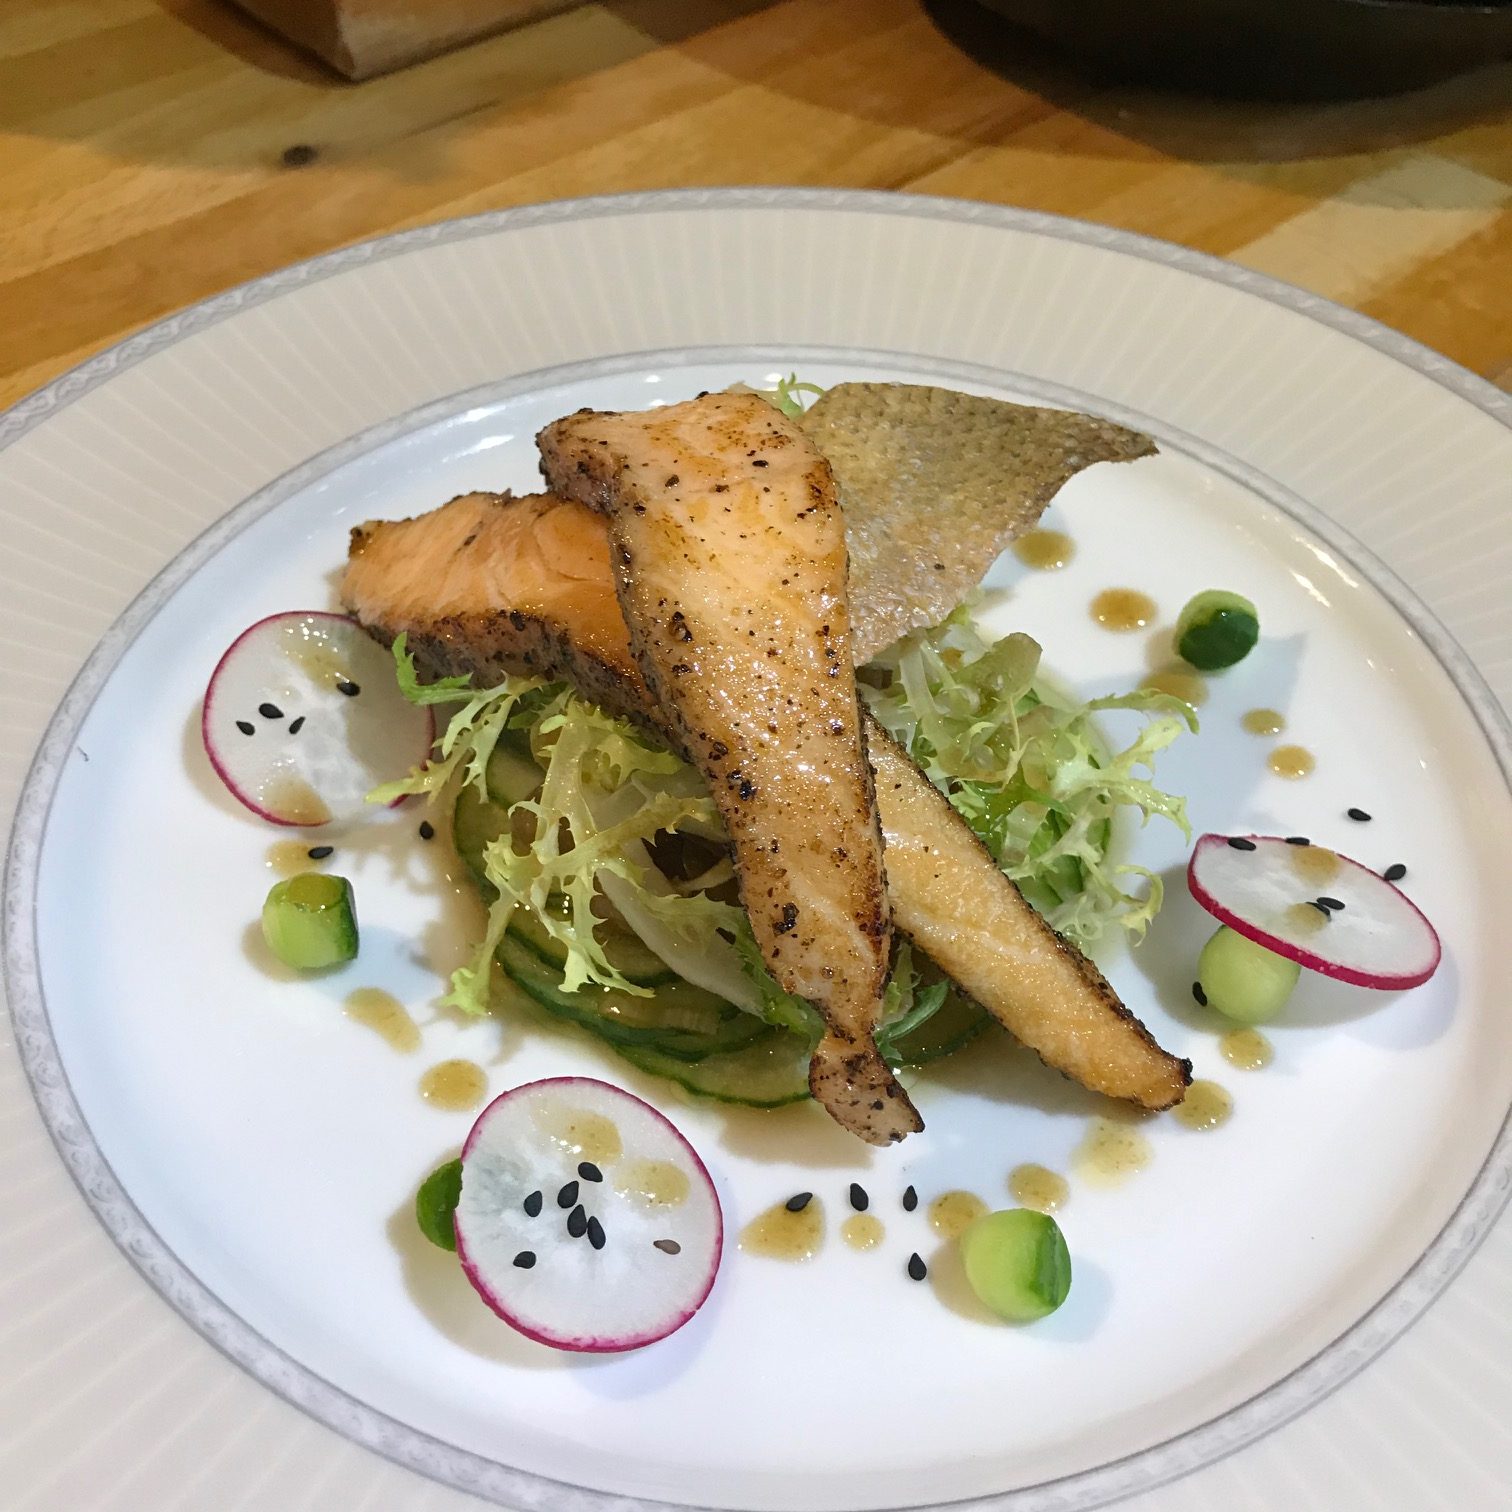 20190822 - Seared Black Peppered Salmon with Cucumber Pickle